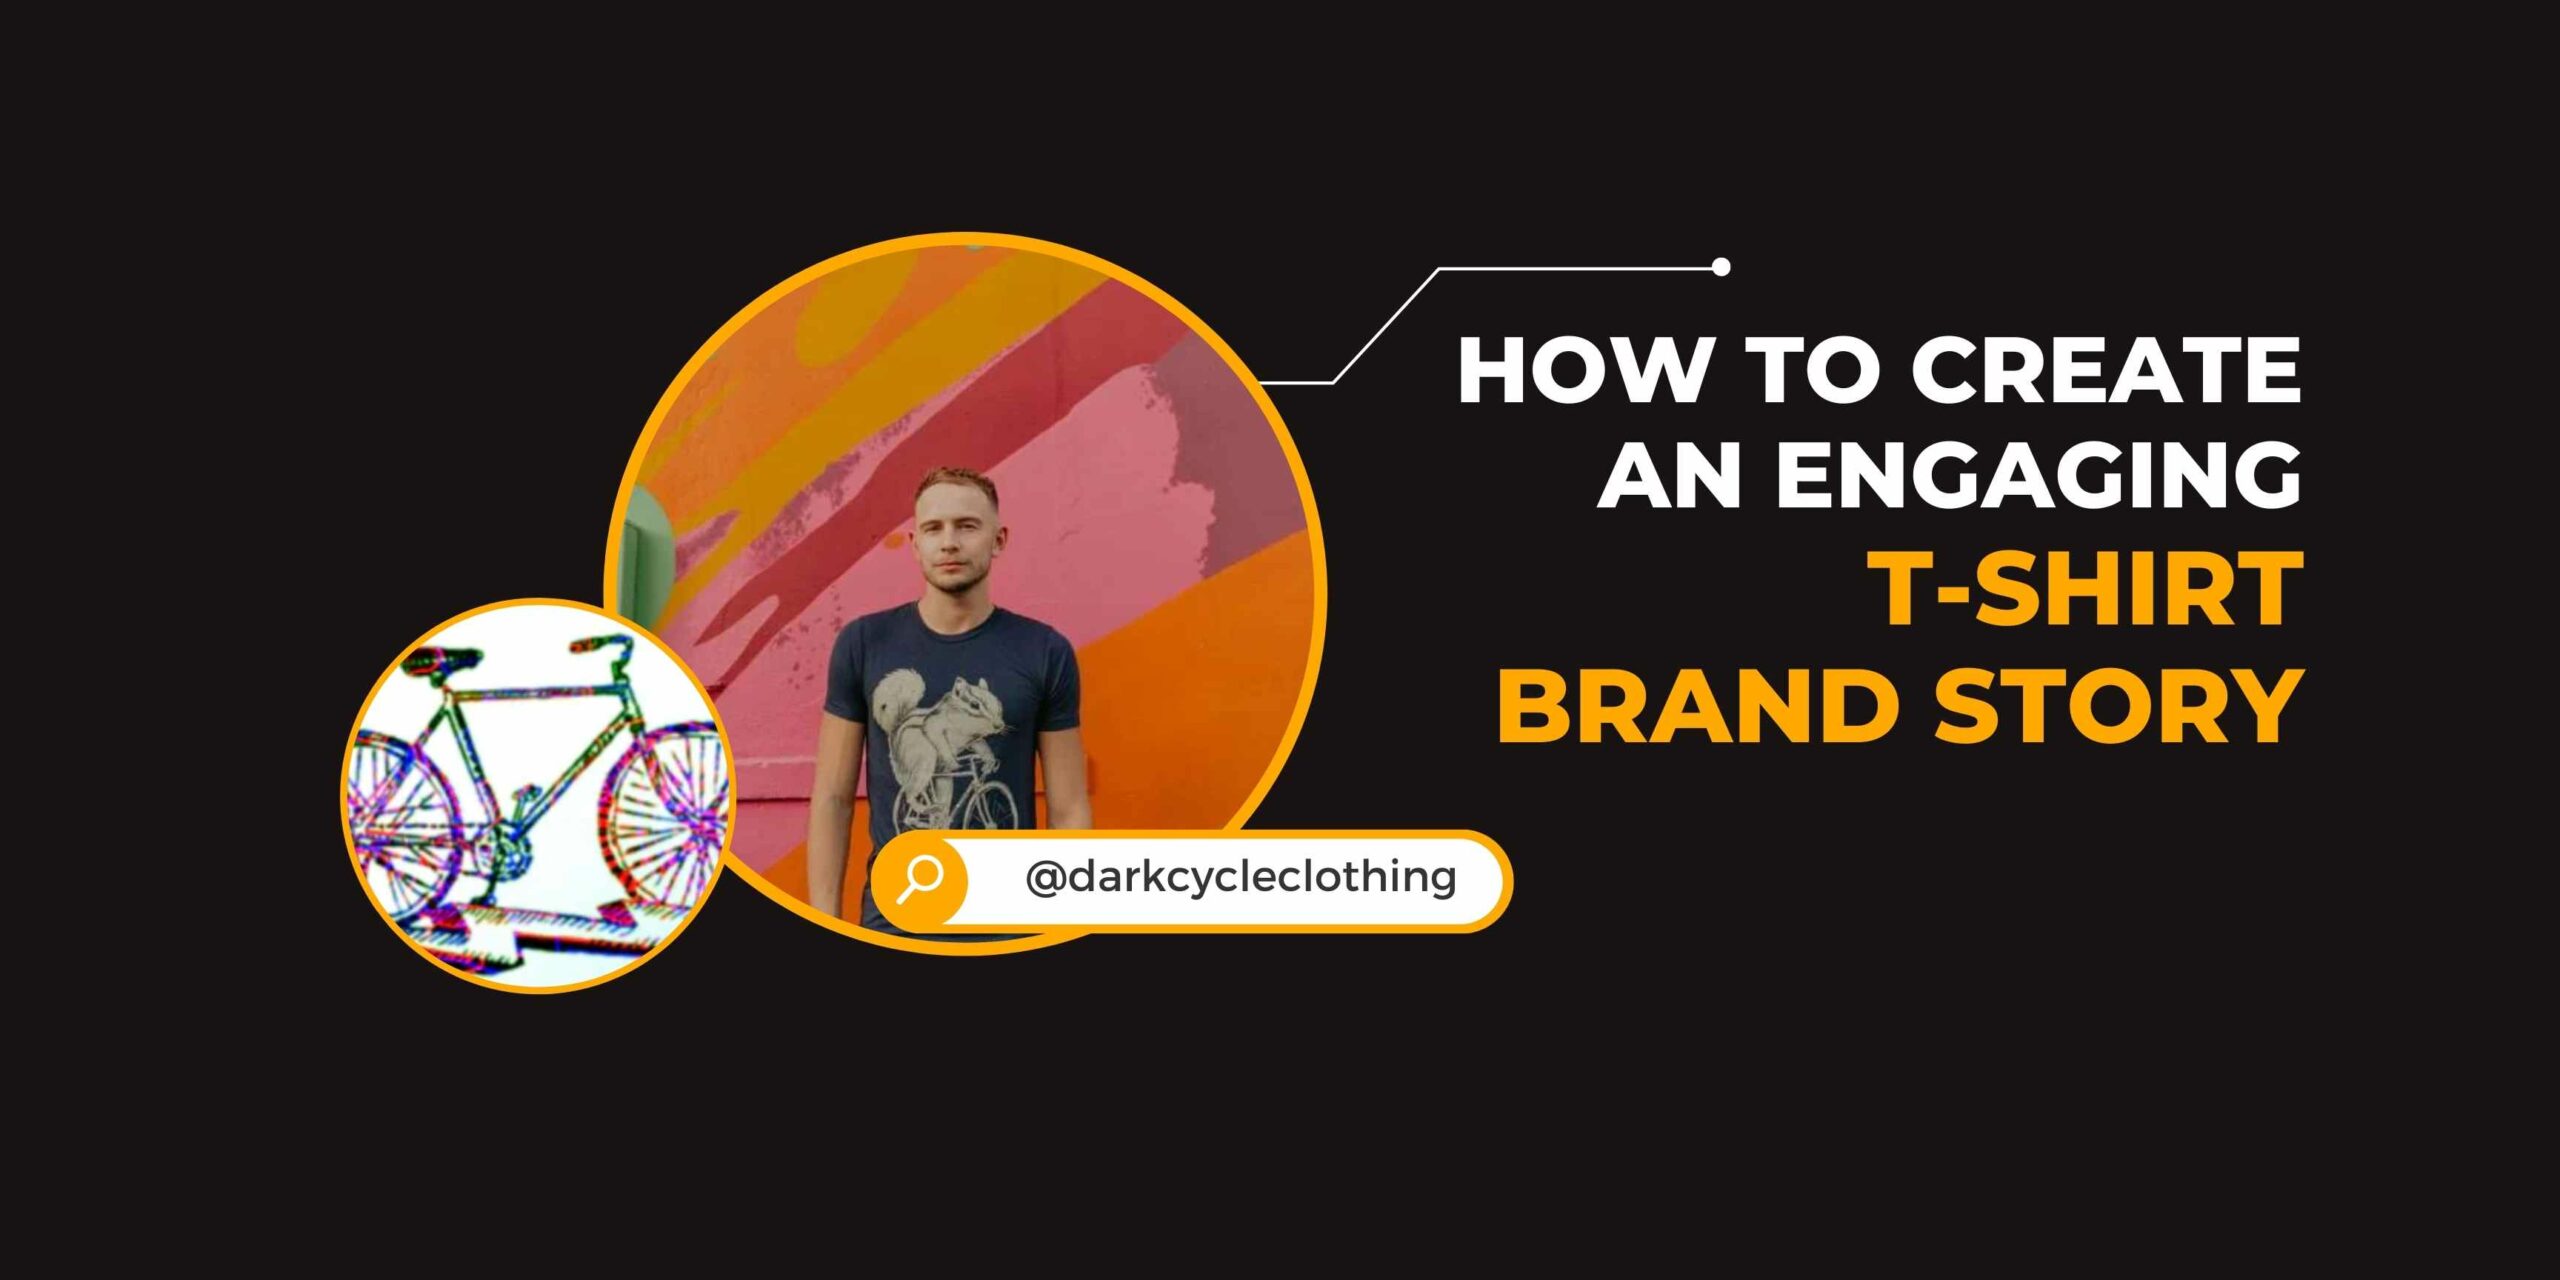 How to Create an Engaging T-shirt brand story